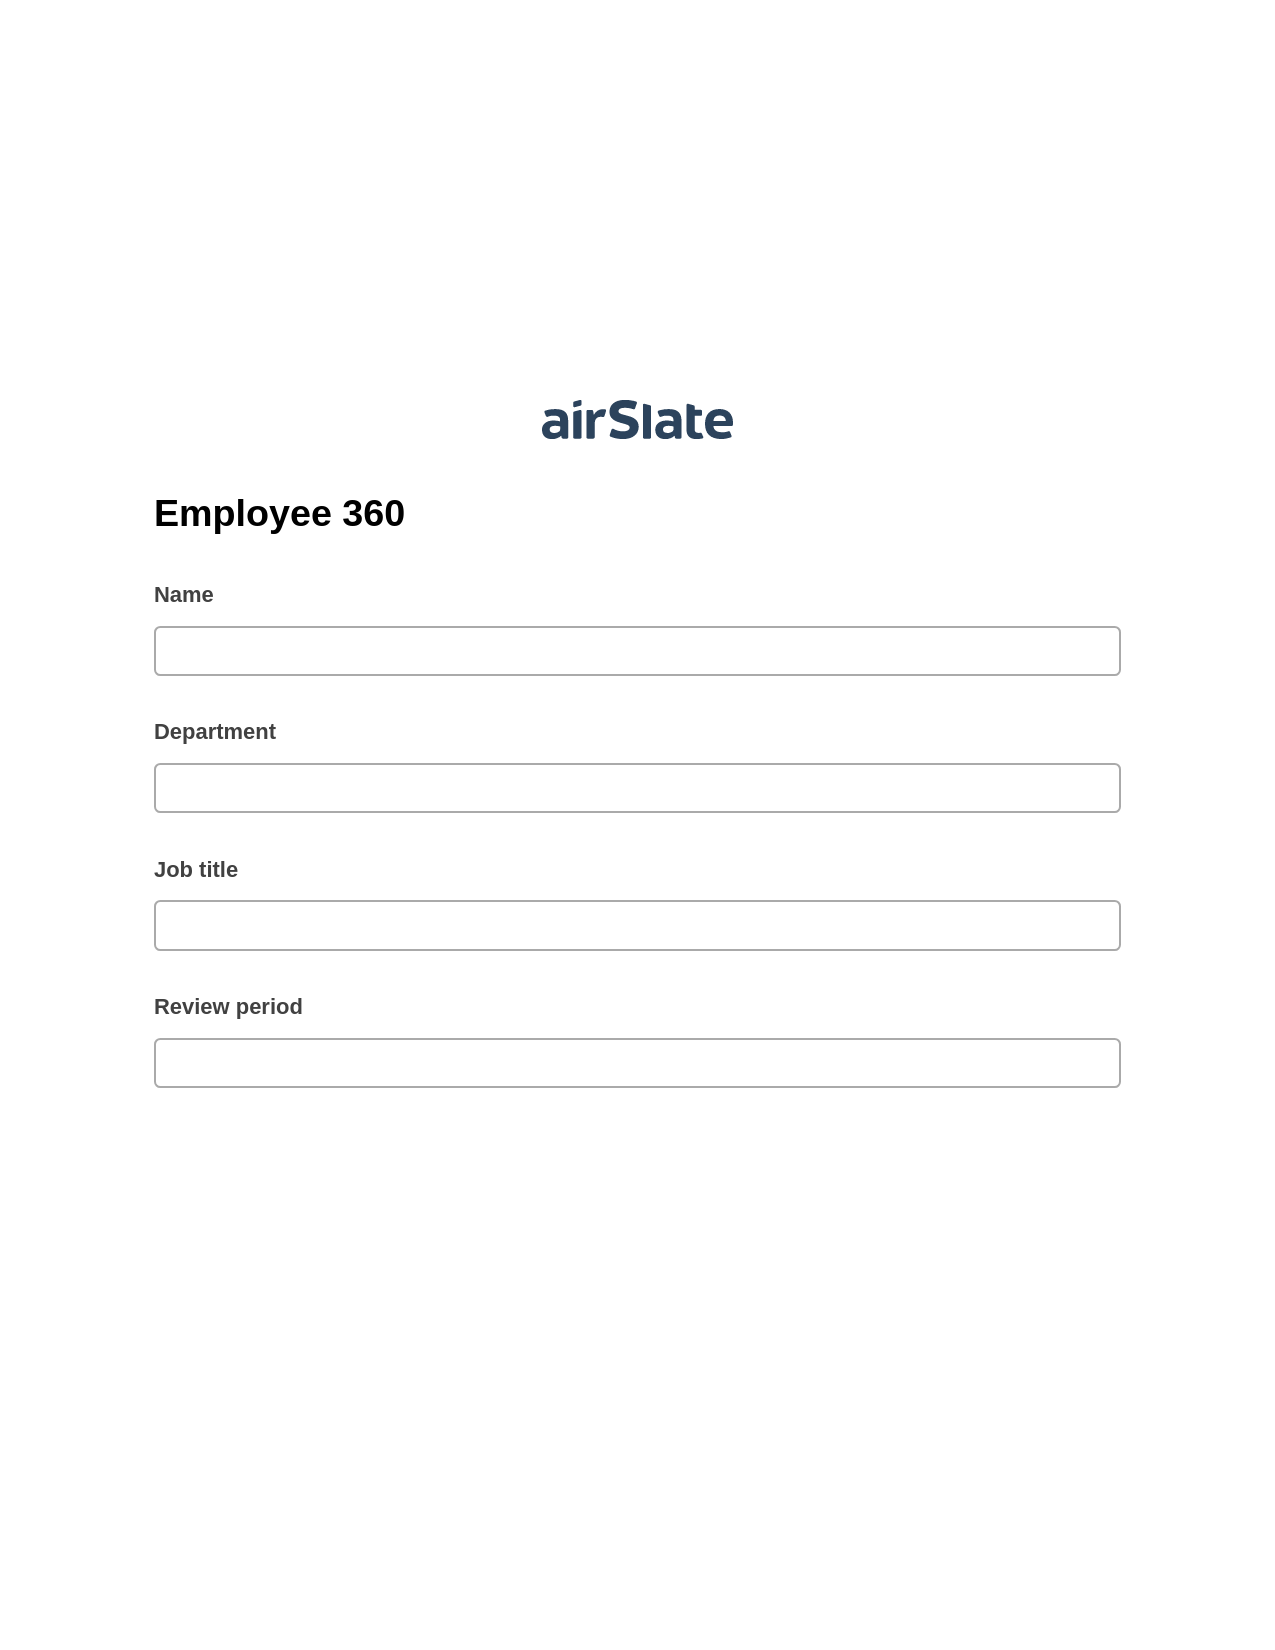 Multirole Employee 360 Pre-fill Dropdowns from CSV file Bot, Create QuickBooks Invoice Bot, Export to Smartsheet